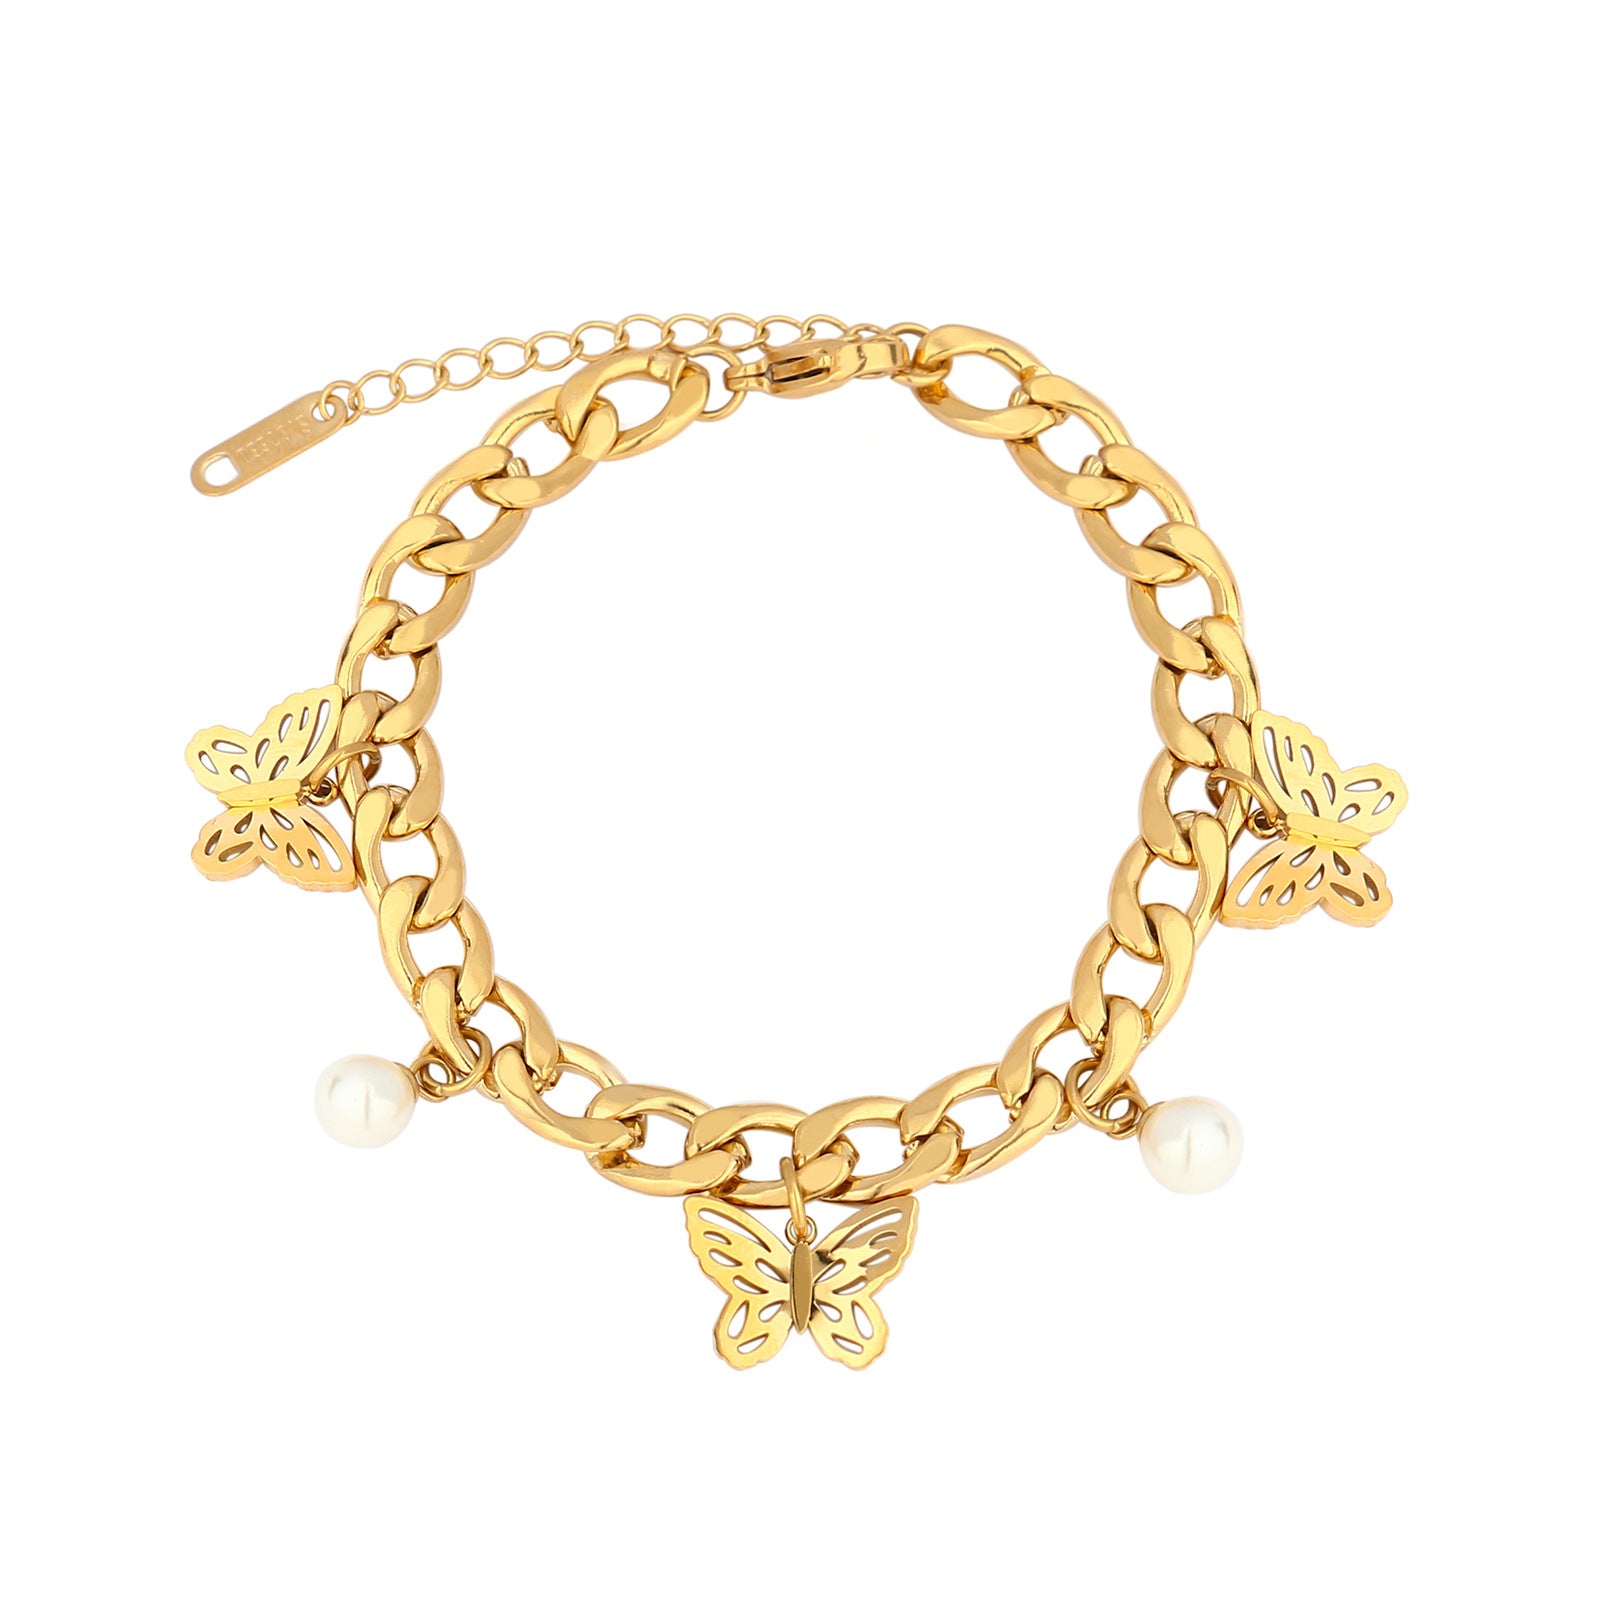 Vintage Exaggerated Personality Multi-Layer Gold-Plated Butterfly Bracelet for Women  UponBasics Butterfly A Golden 